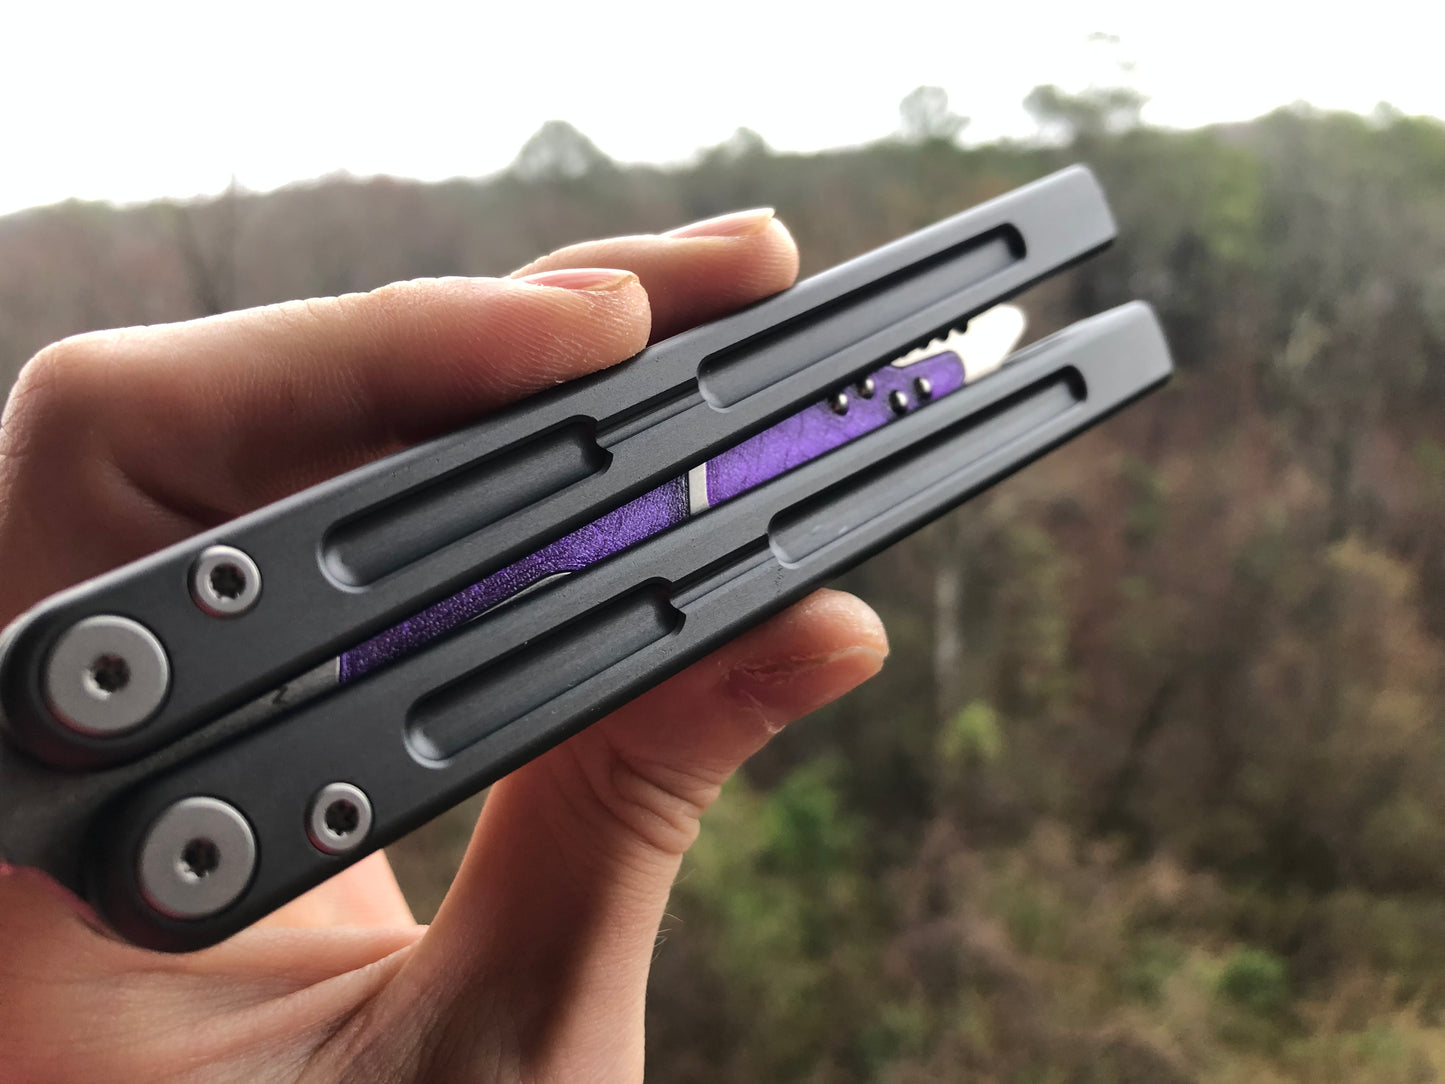 Improve the balance of your Maxace Serpent Striker v3 and Maxace Phantom balisong trainer with tungsten-weighted trainer blade inserts and extension spacers with jimping.